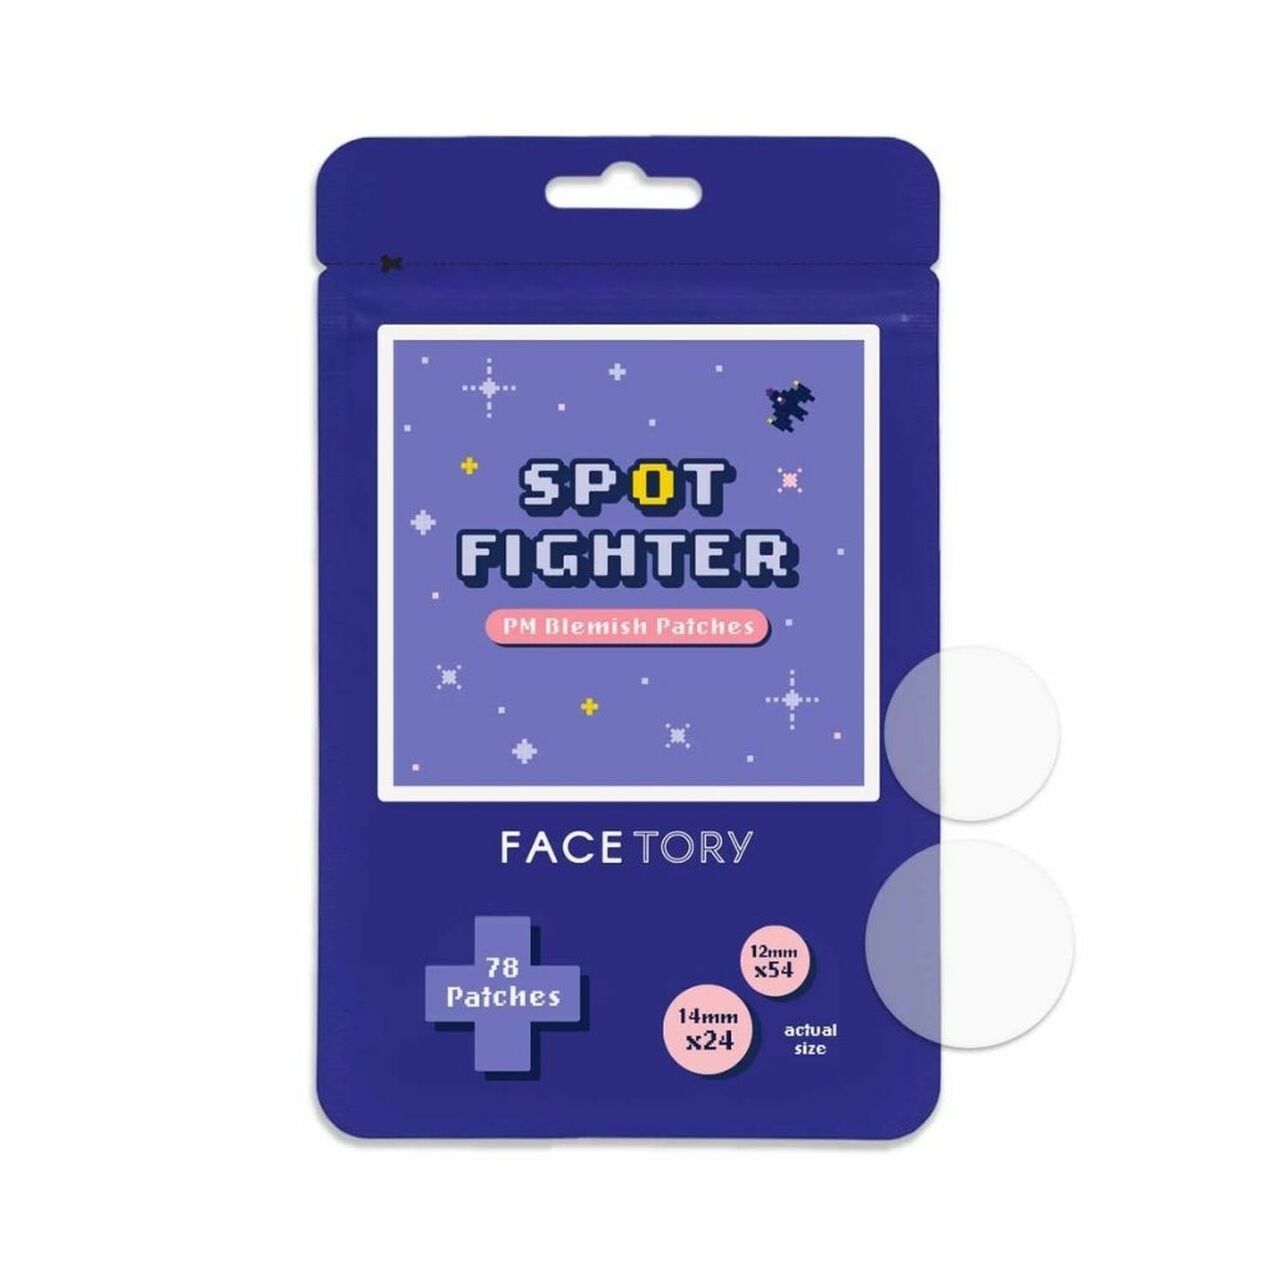 SPOT FIGHTER BLEMISH PATCHES - FOR ACNE AND PIMPLES - PM | Pimple patch | LOSHEN & CREM